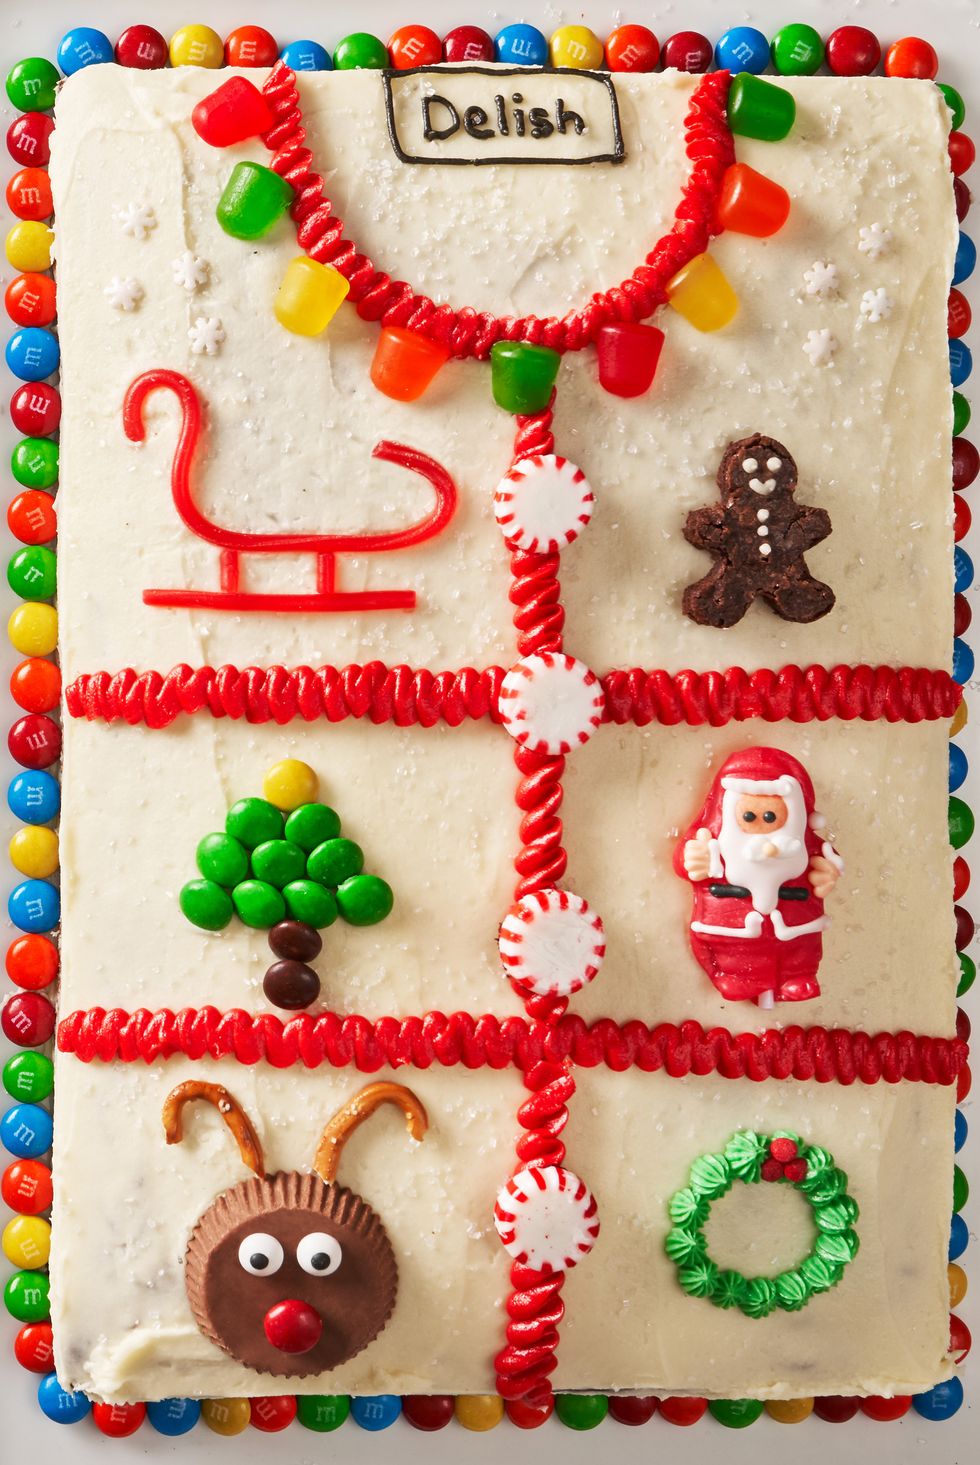 cake decorated like an ugly christmas sweater